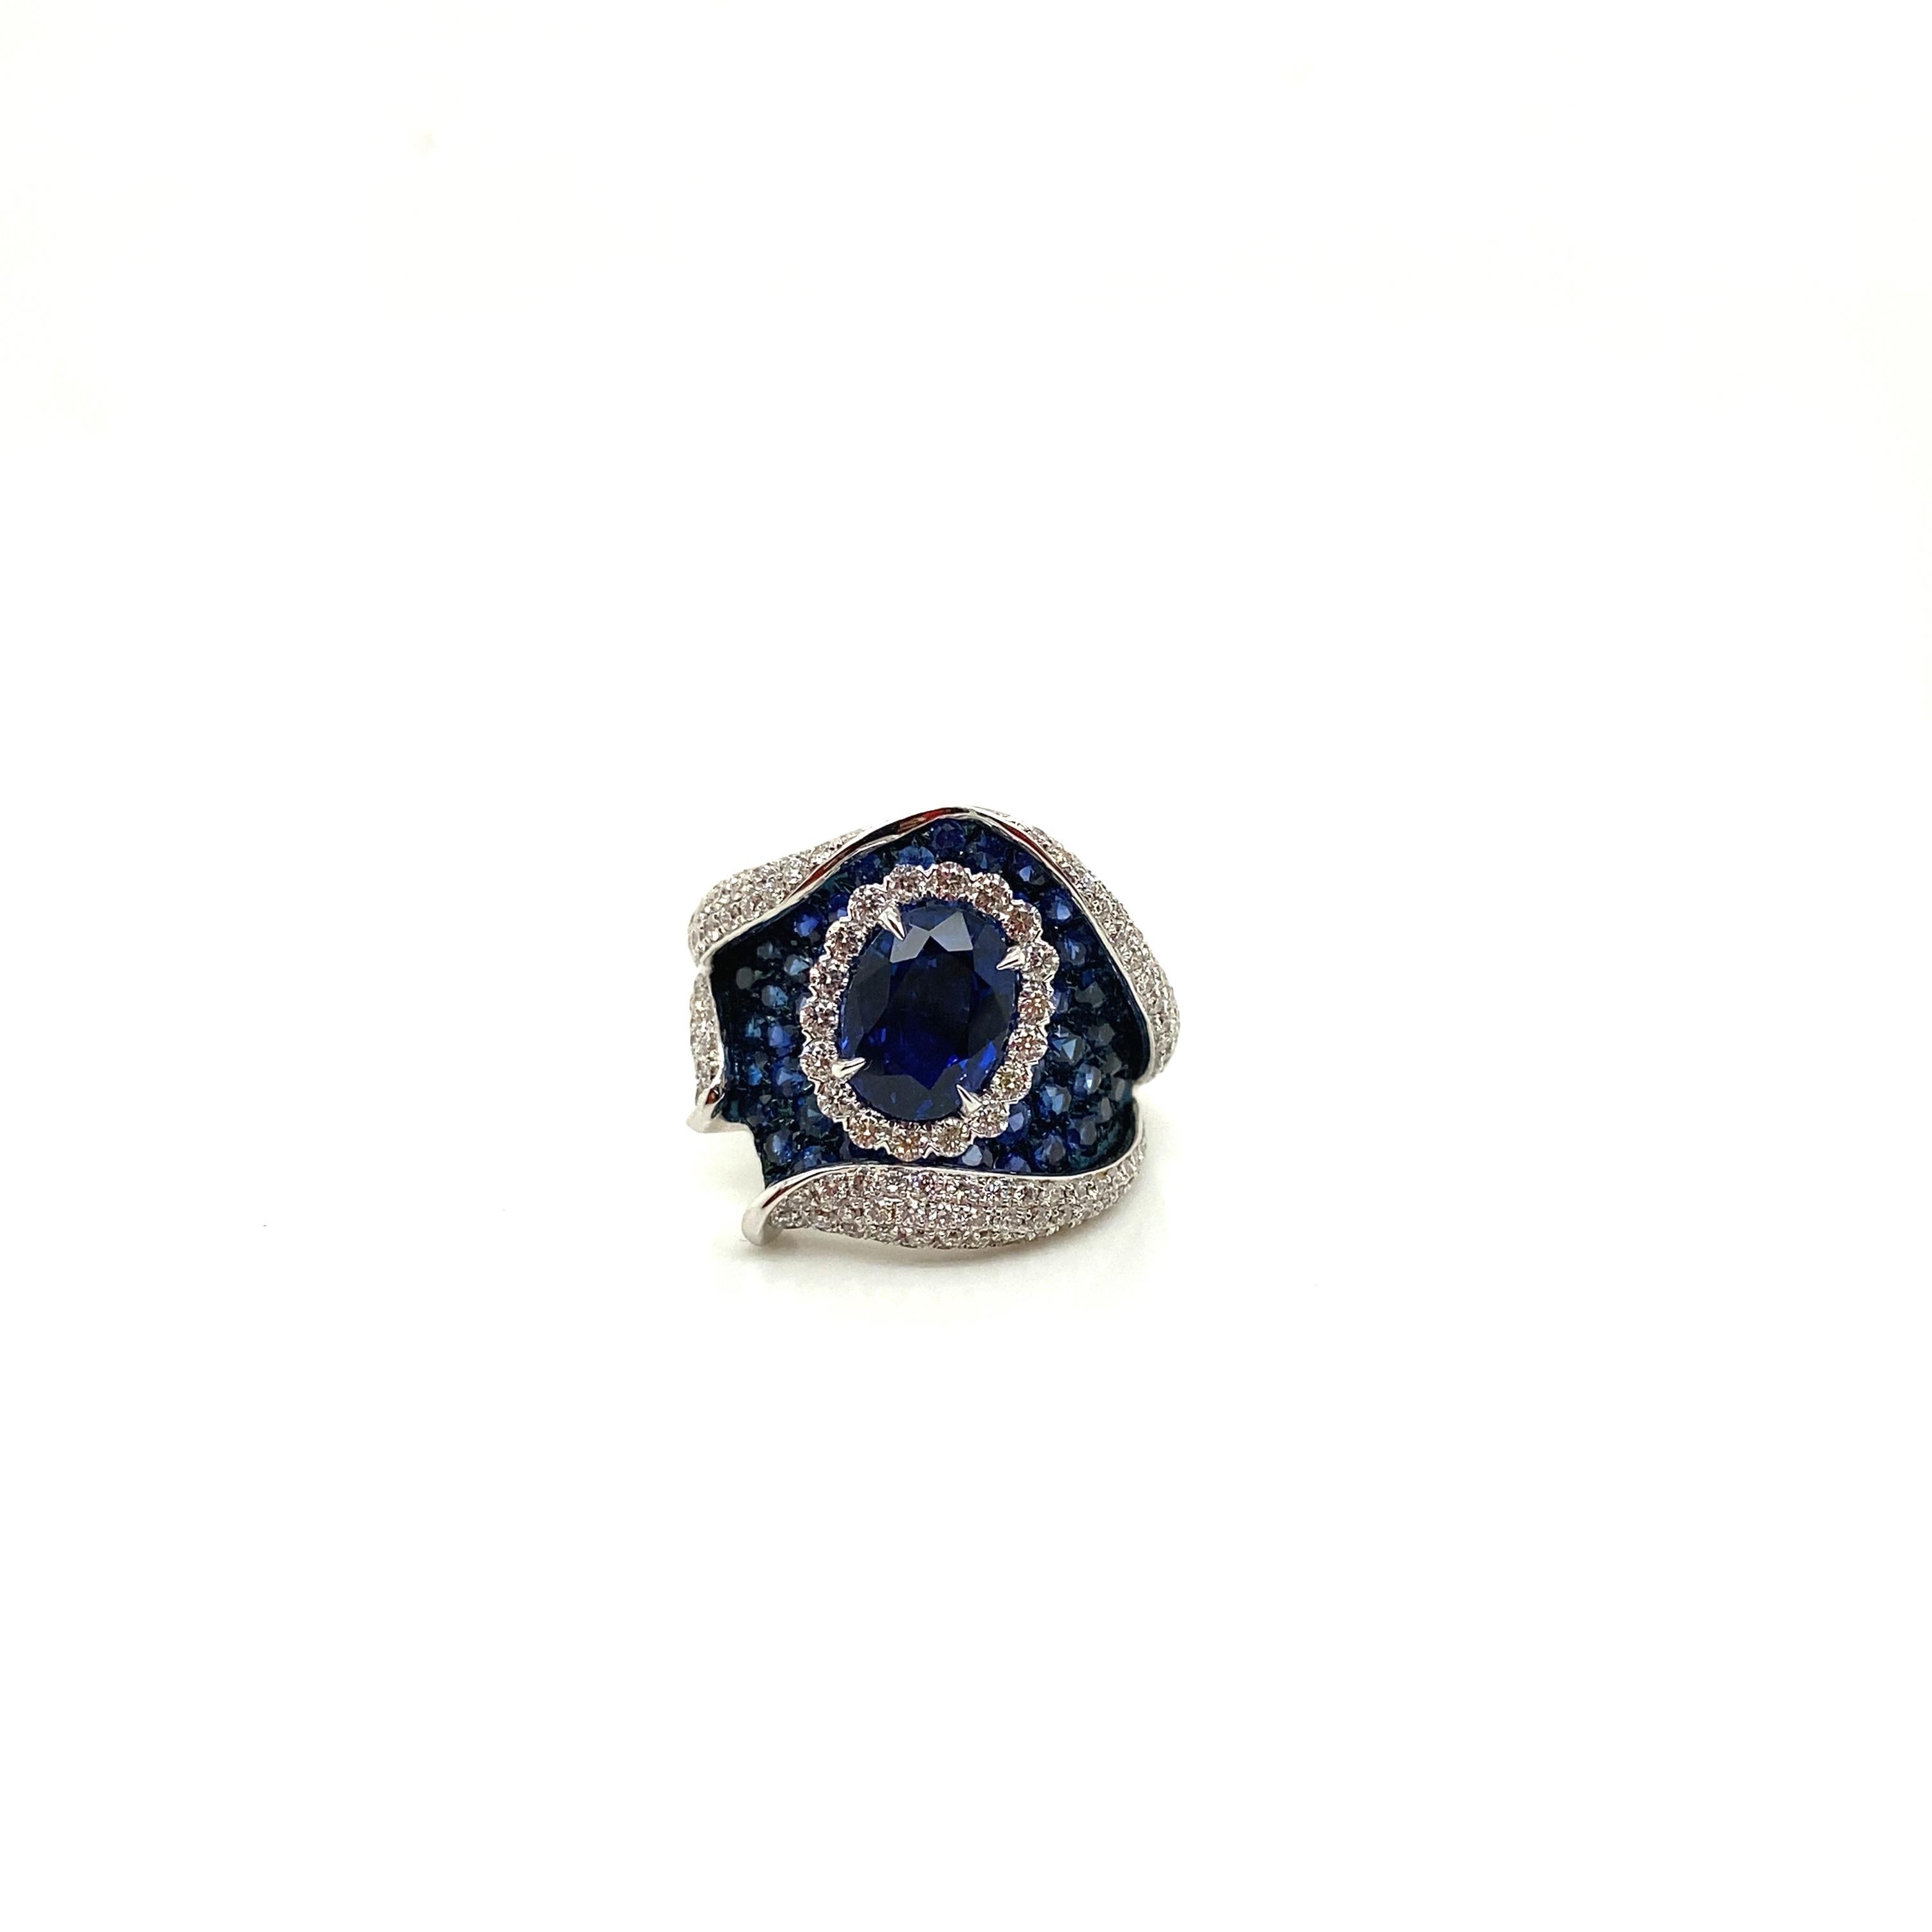 2.36 Carat Natural Oval-Cut Royal Blue Sapphire and White Diamond Gold Ring:

A stylish ring, it features a gorgeous natural oval-cut royal blue sapphire weighing 2.36 carat surrounded by a halo of white round brilliant-cut diamonds craftily